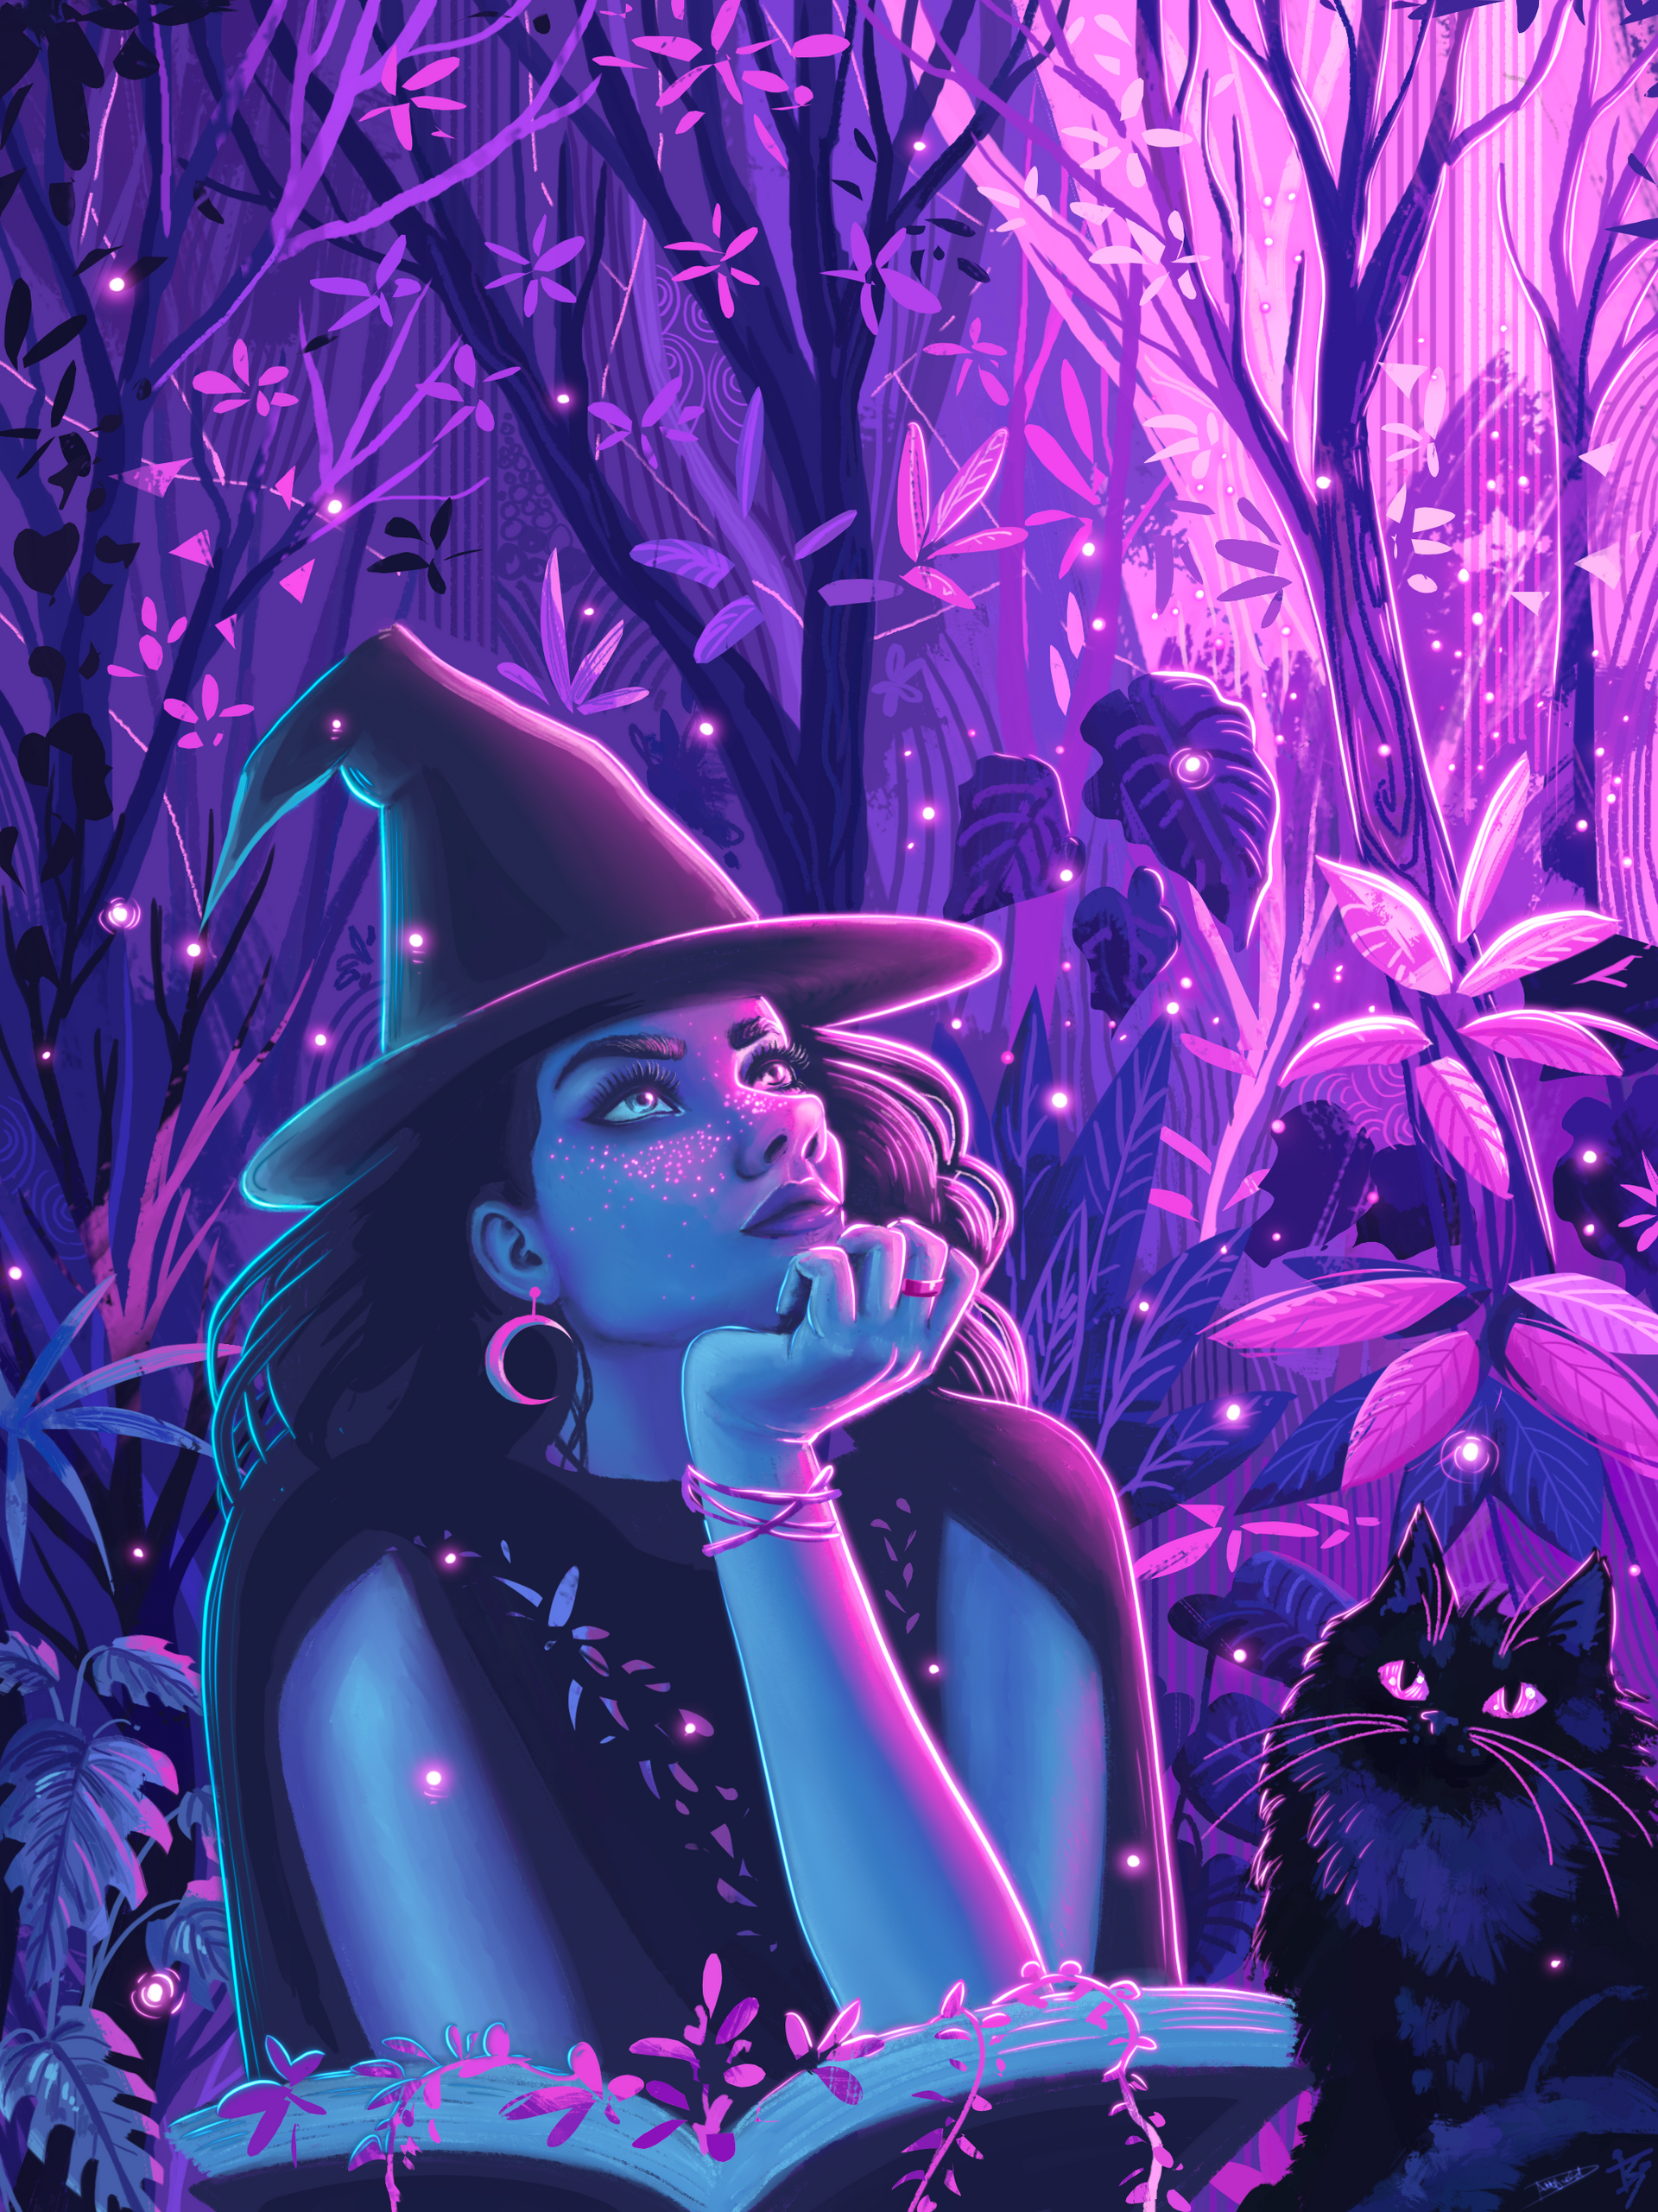 The Witch in the Woods by Daniella Attfield